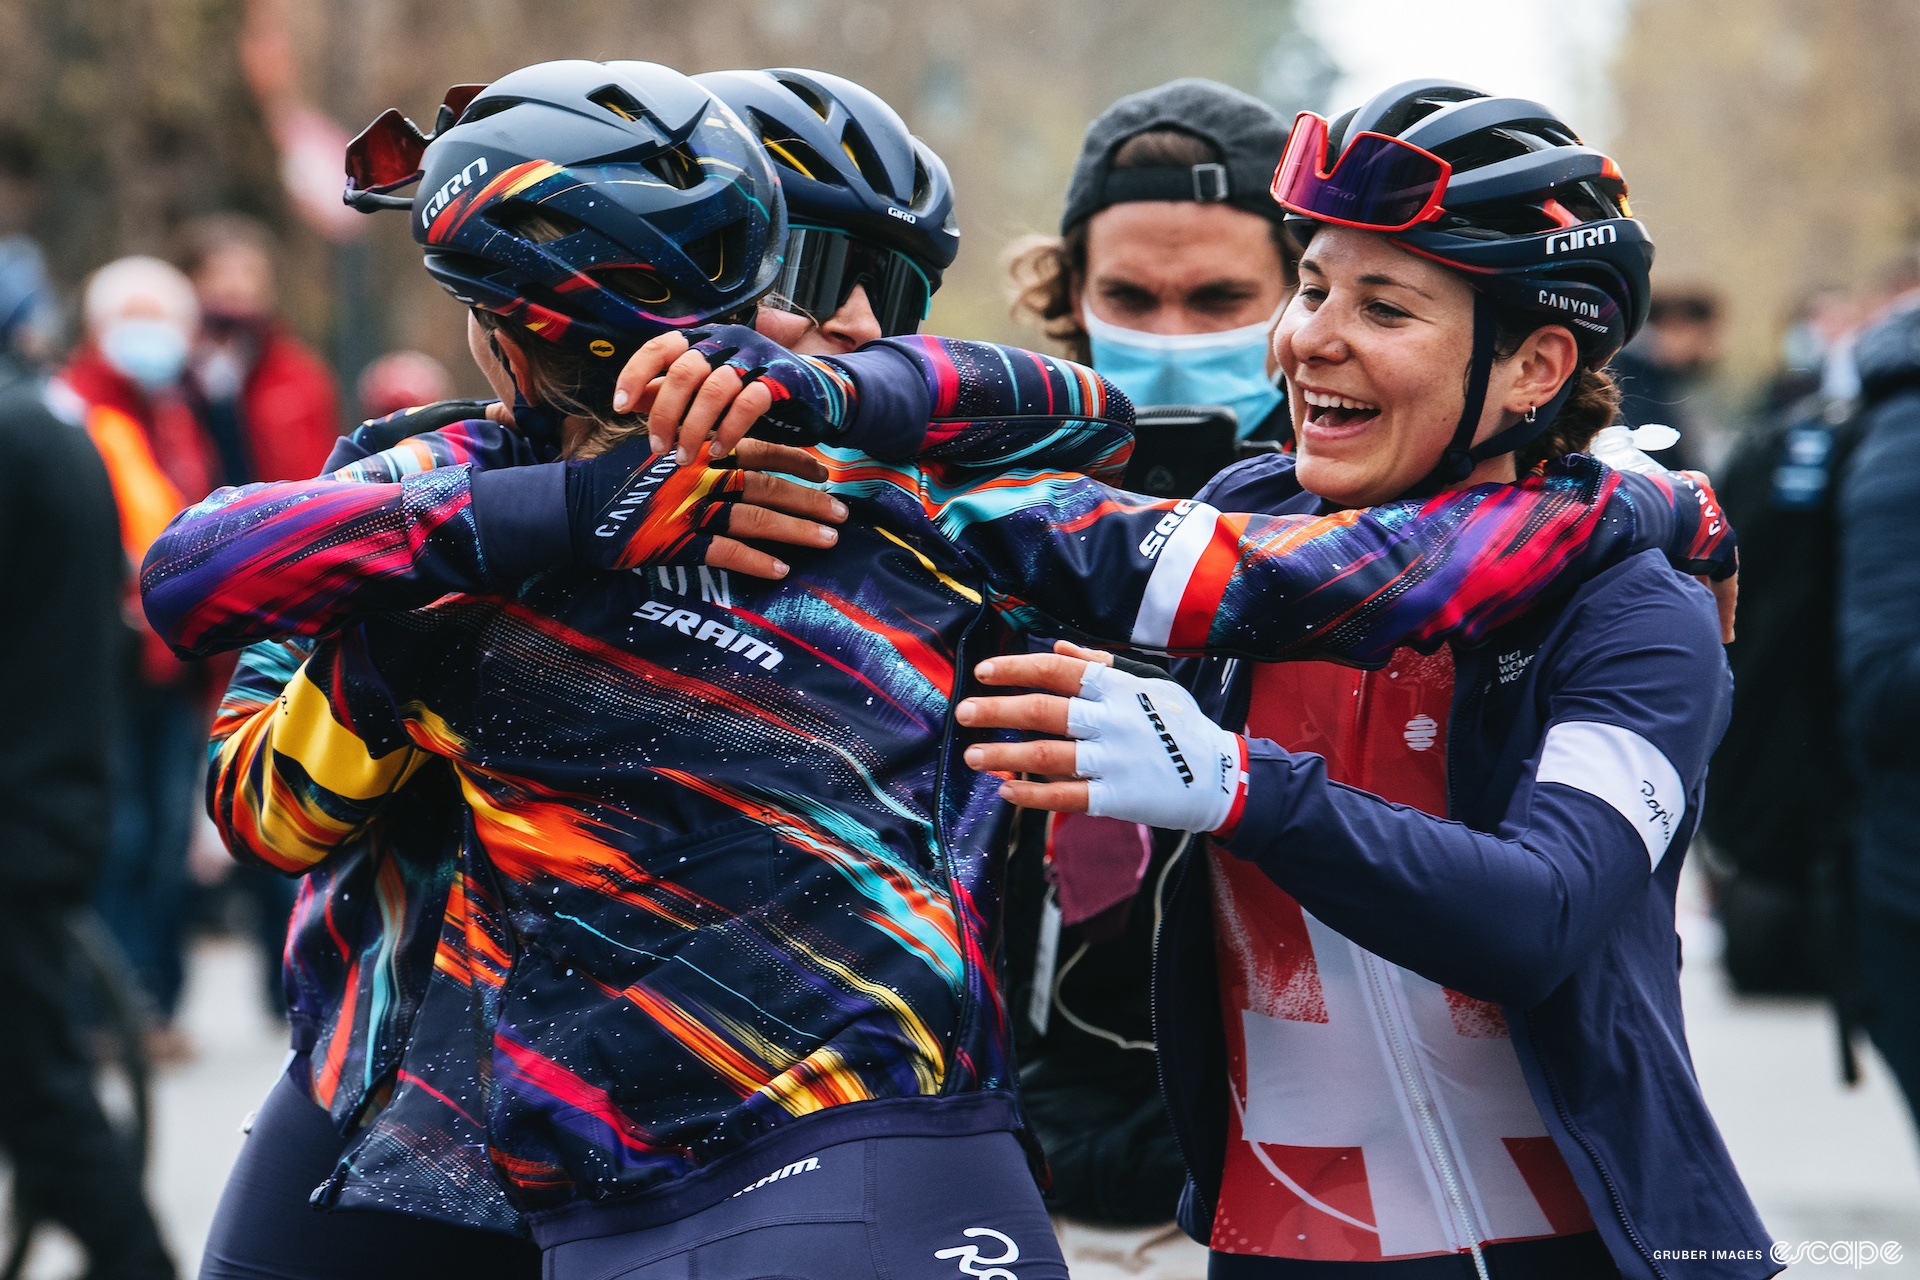 Canyon-SRAM teammates embrace after Kasia Niewiadoma's second-place finish at the 2021 Fleche Wallonne.